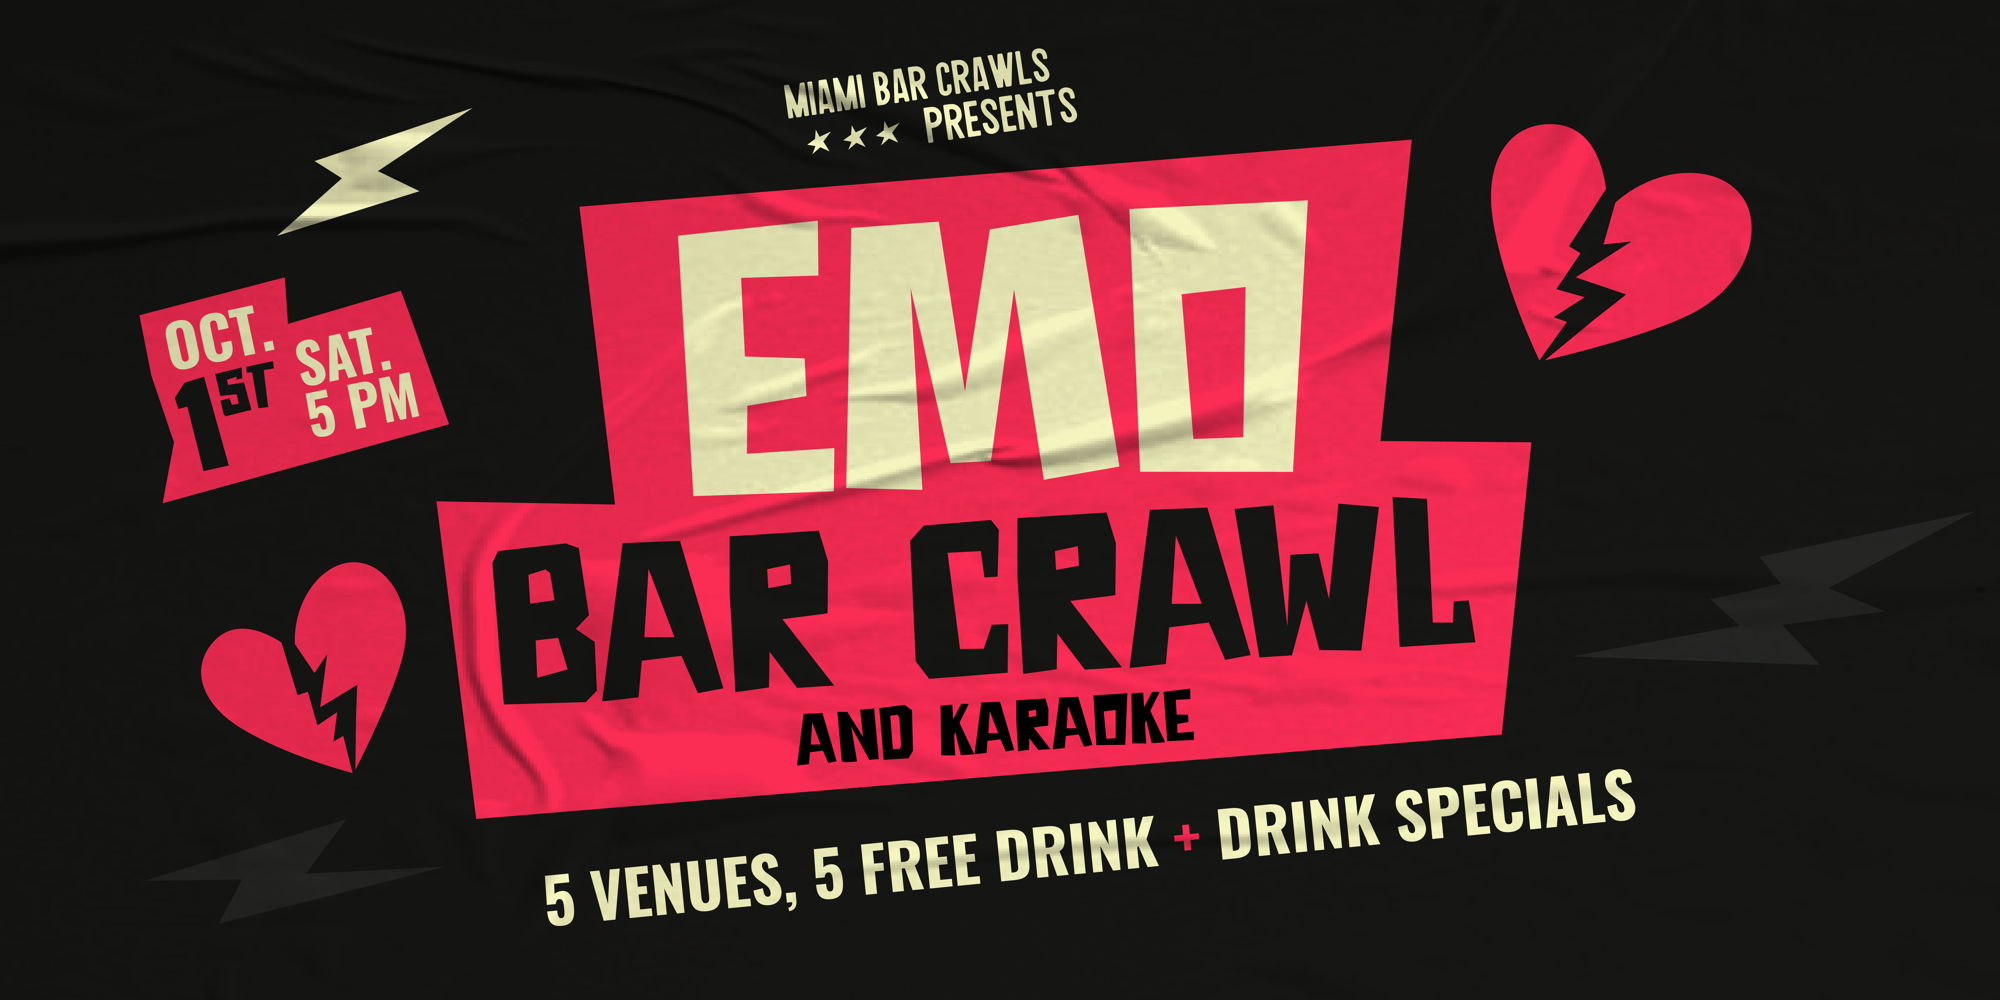 Miami Bar Crawls wants you to crawl your heart out at our Emo Bar Crawl! promotional image